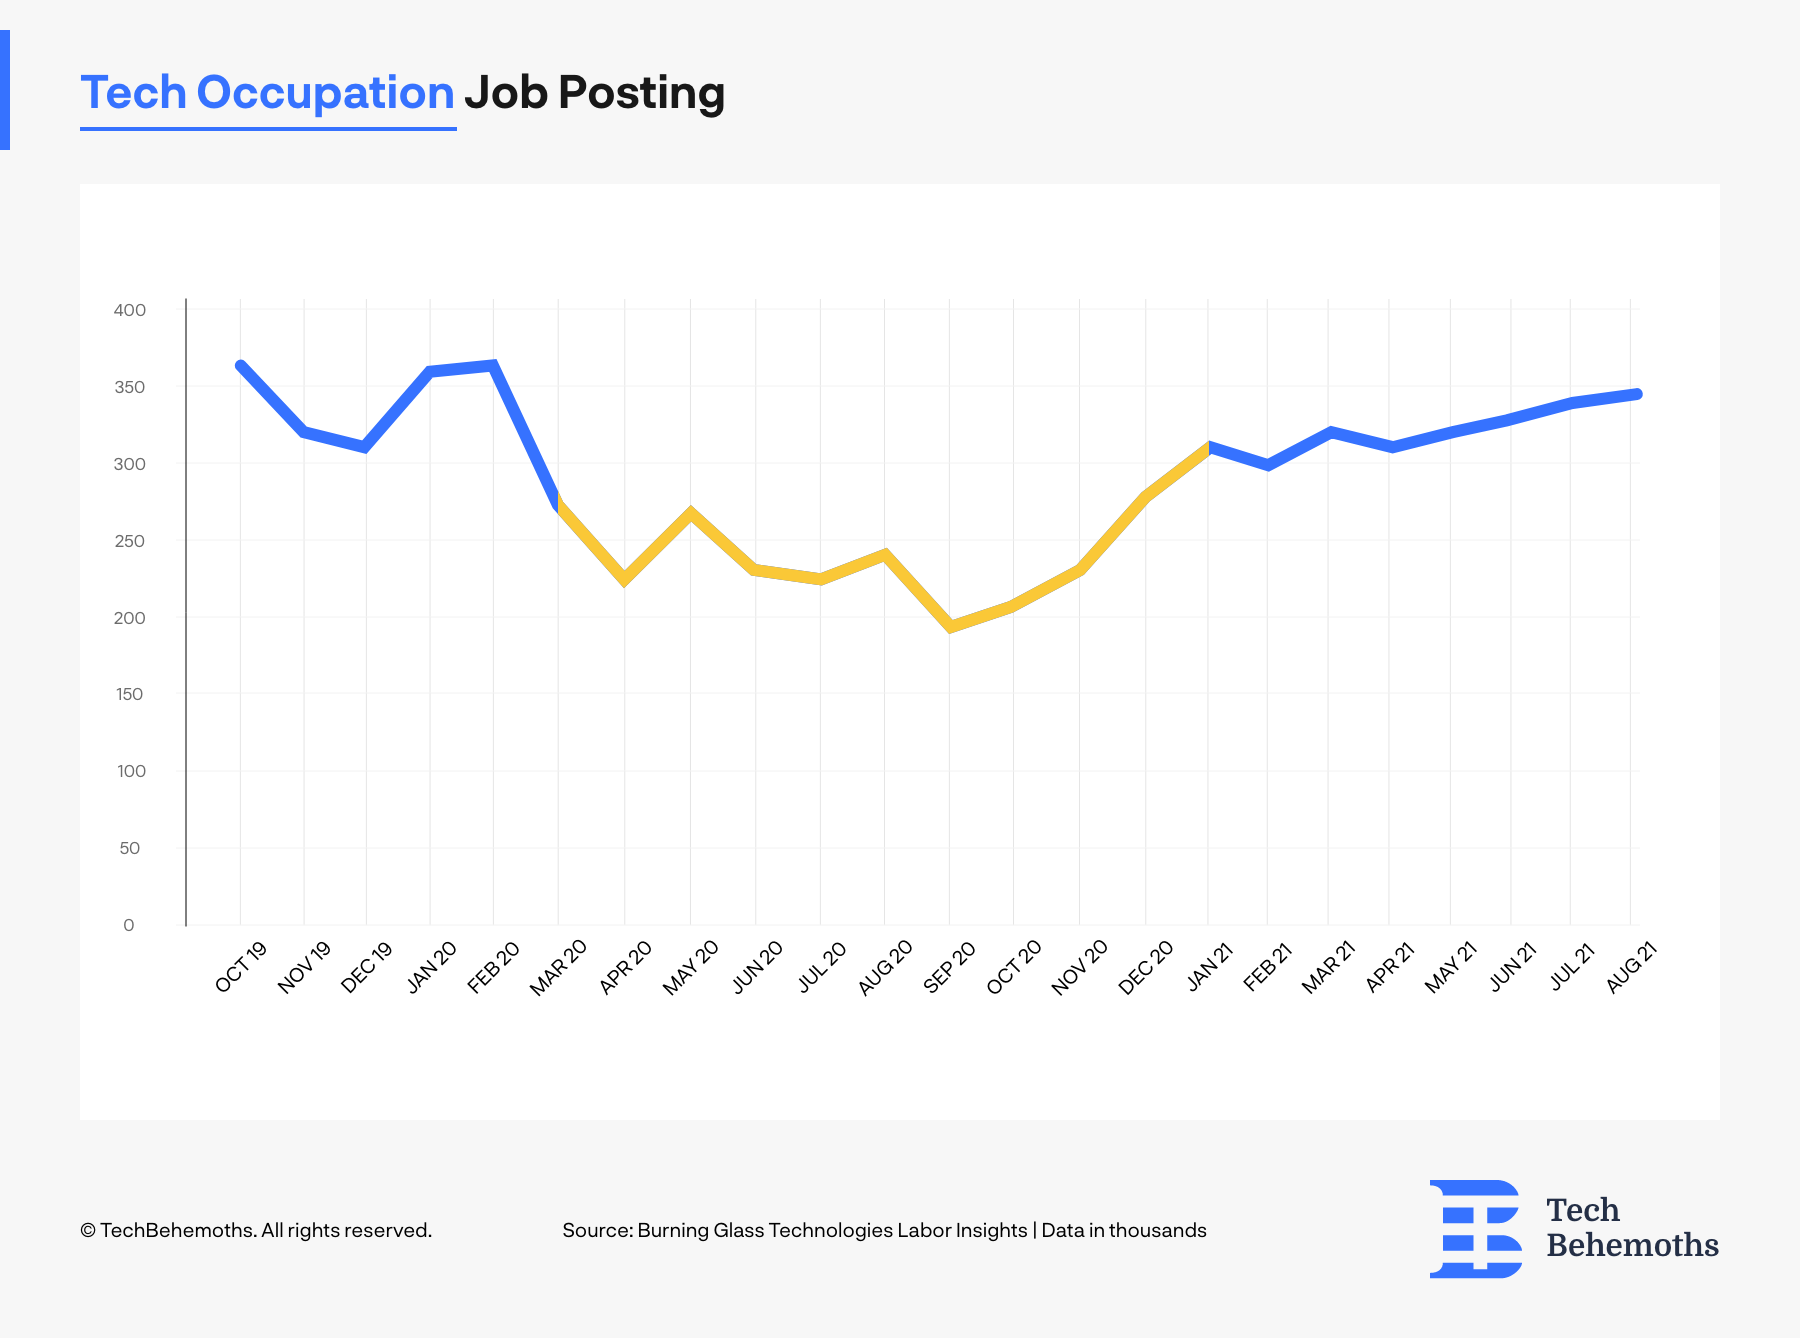 Tech Occupation job posting in US between 2019 and 2021 statistic graph